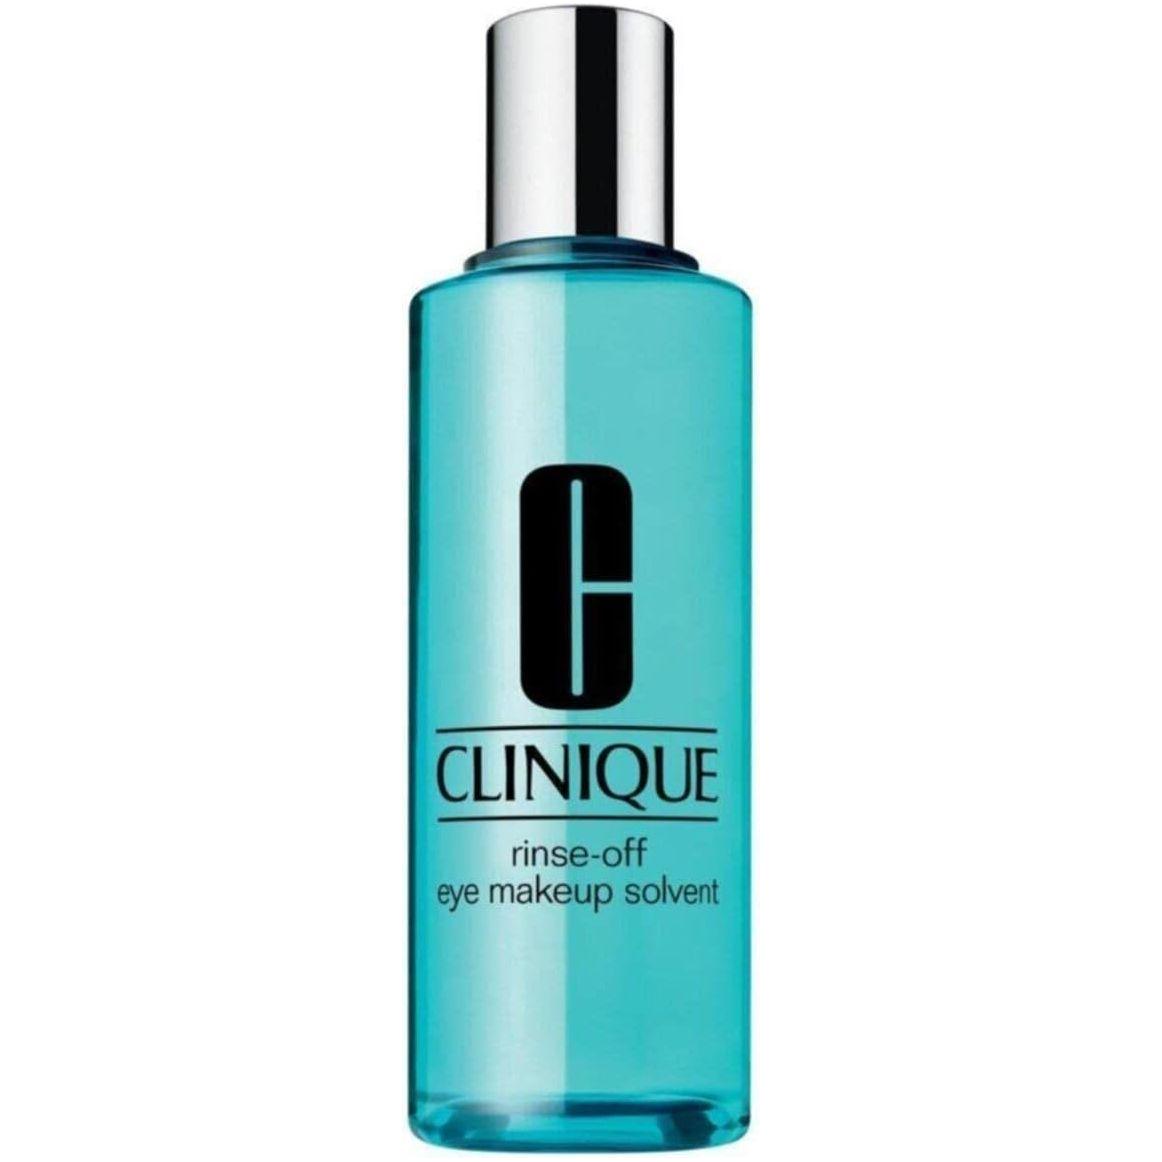 Clinique Rinse-Off Eye Make Up Solvent 125 ml - DG International Ventures Limited